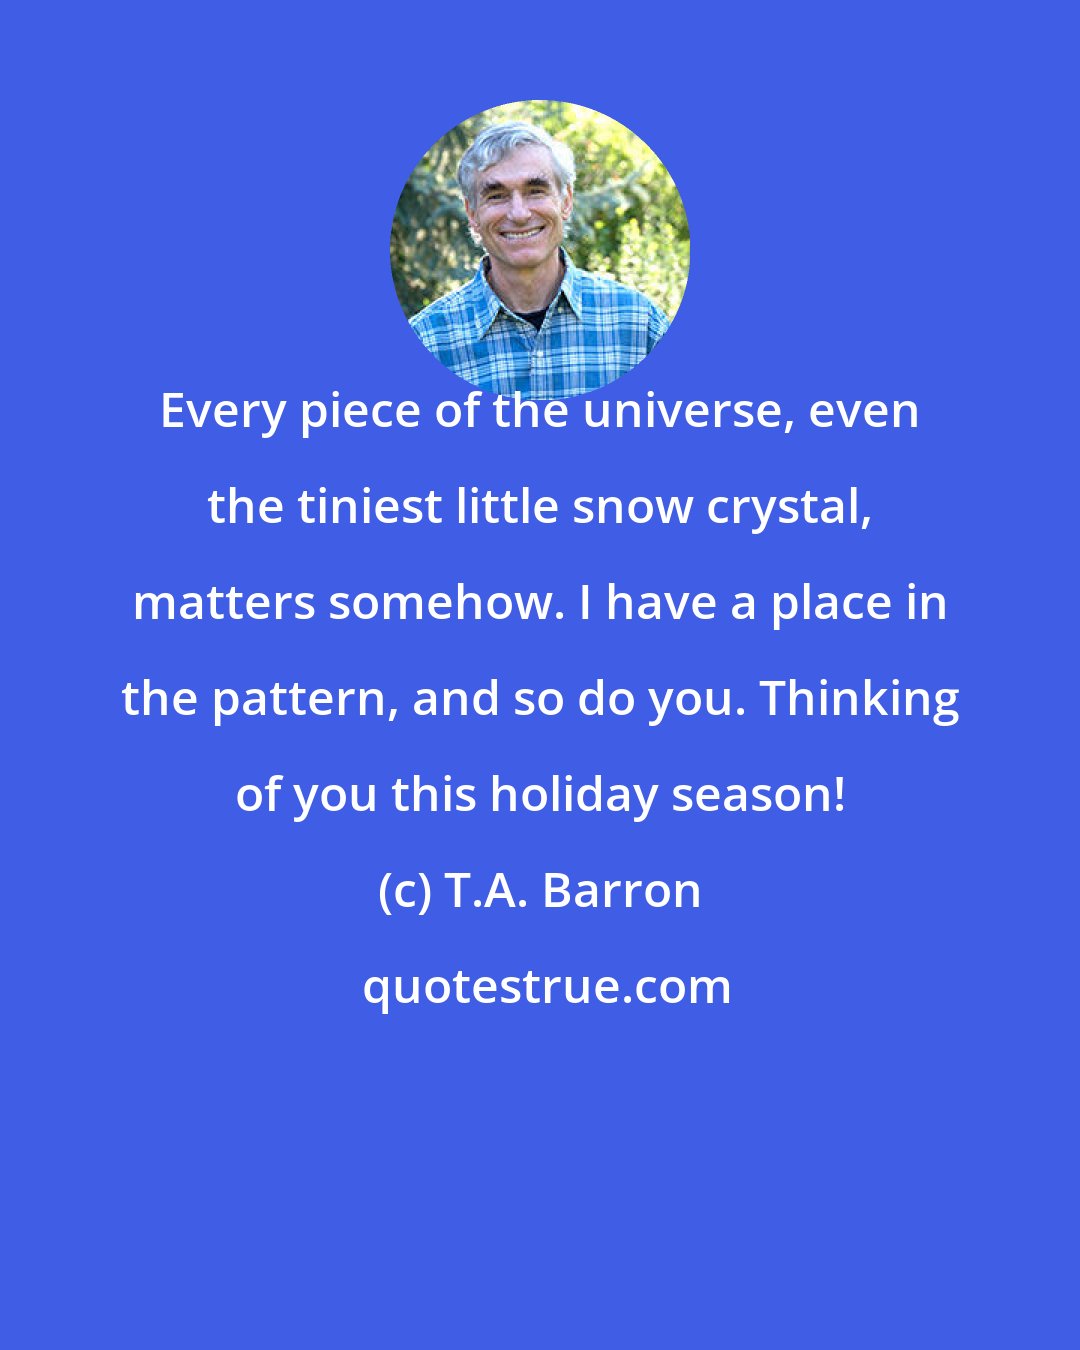 T.A. Barron: Every piece of the universe, even the tiniest little snow crystal, matters somehow. I have a place in the pattern, and so do you. Thinking of you this holiday season!